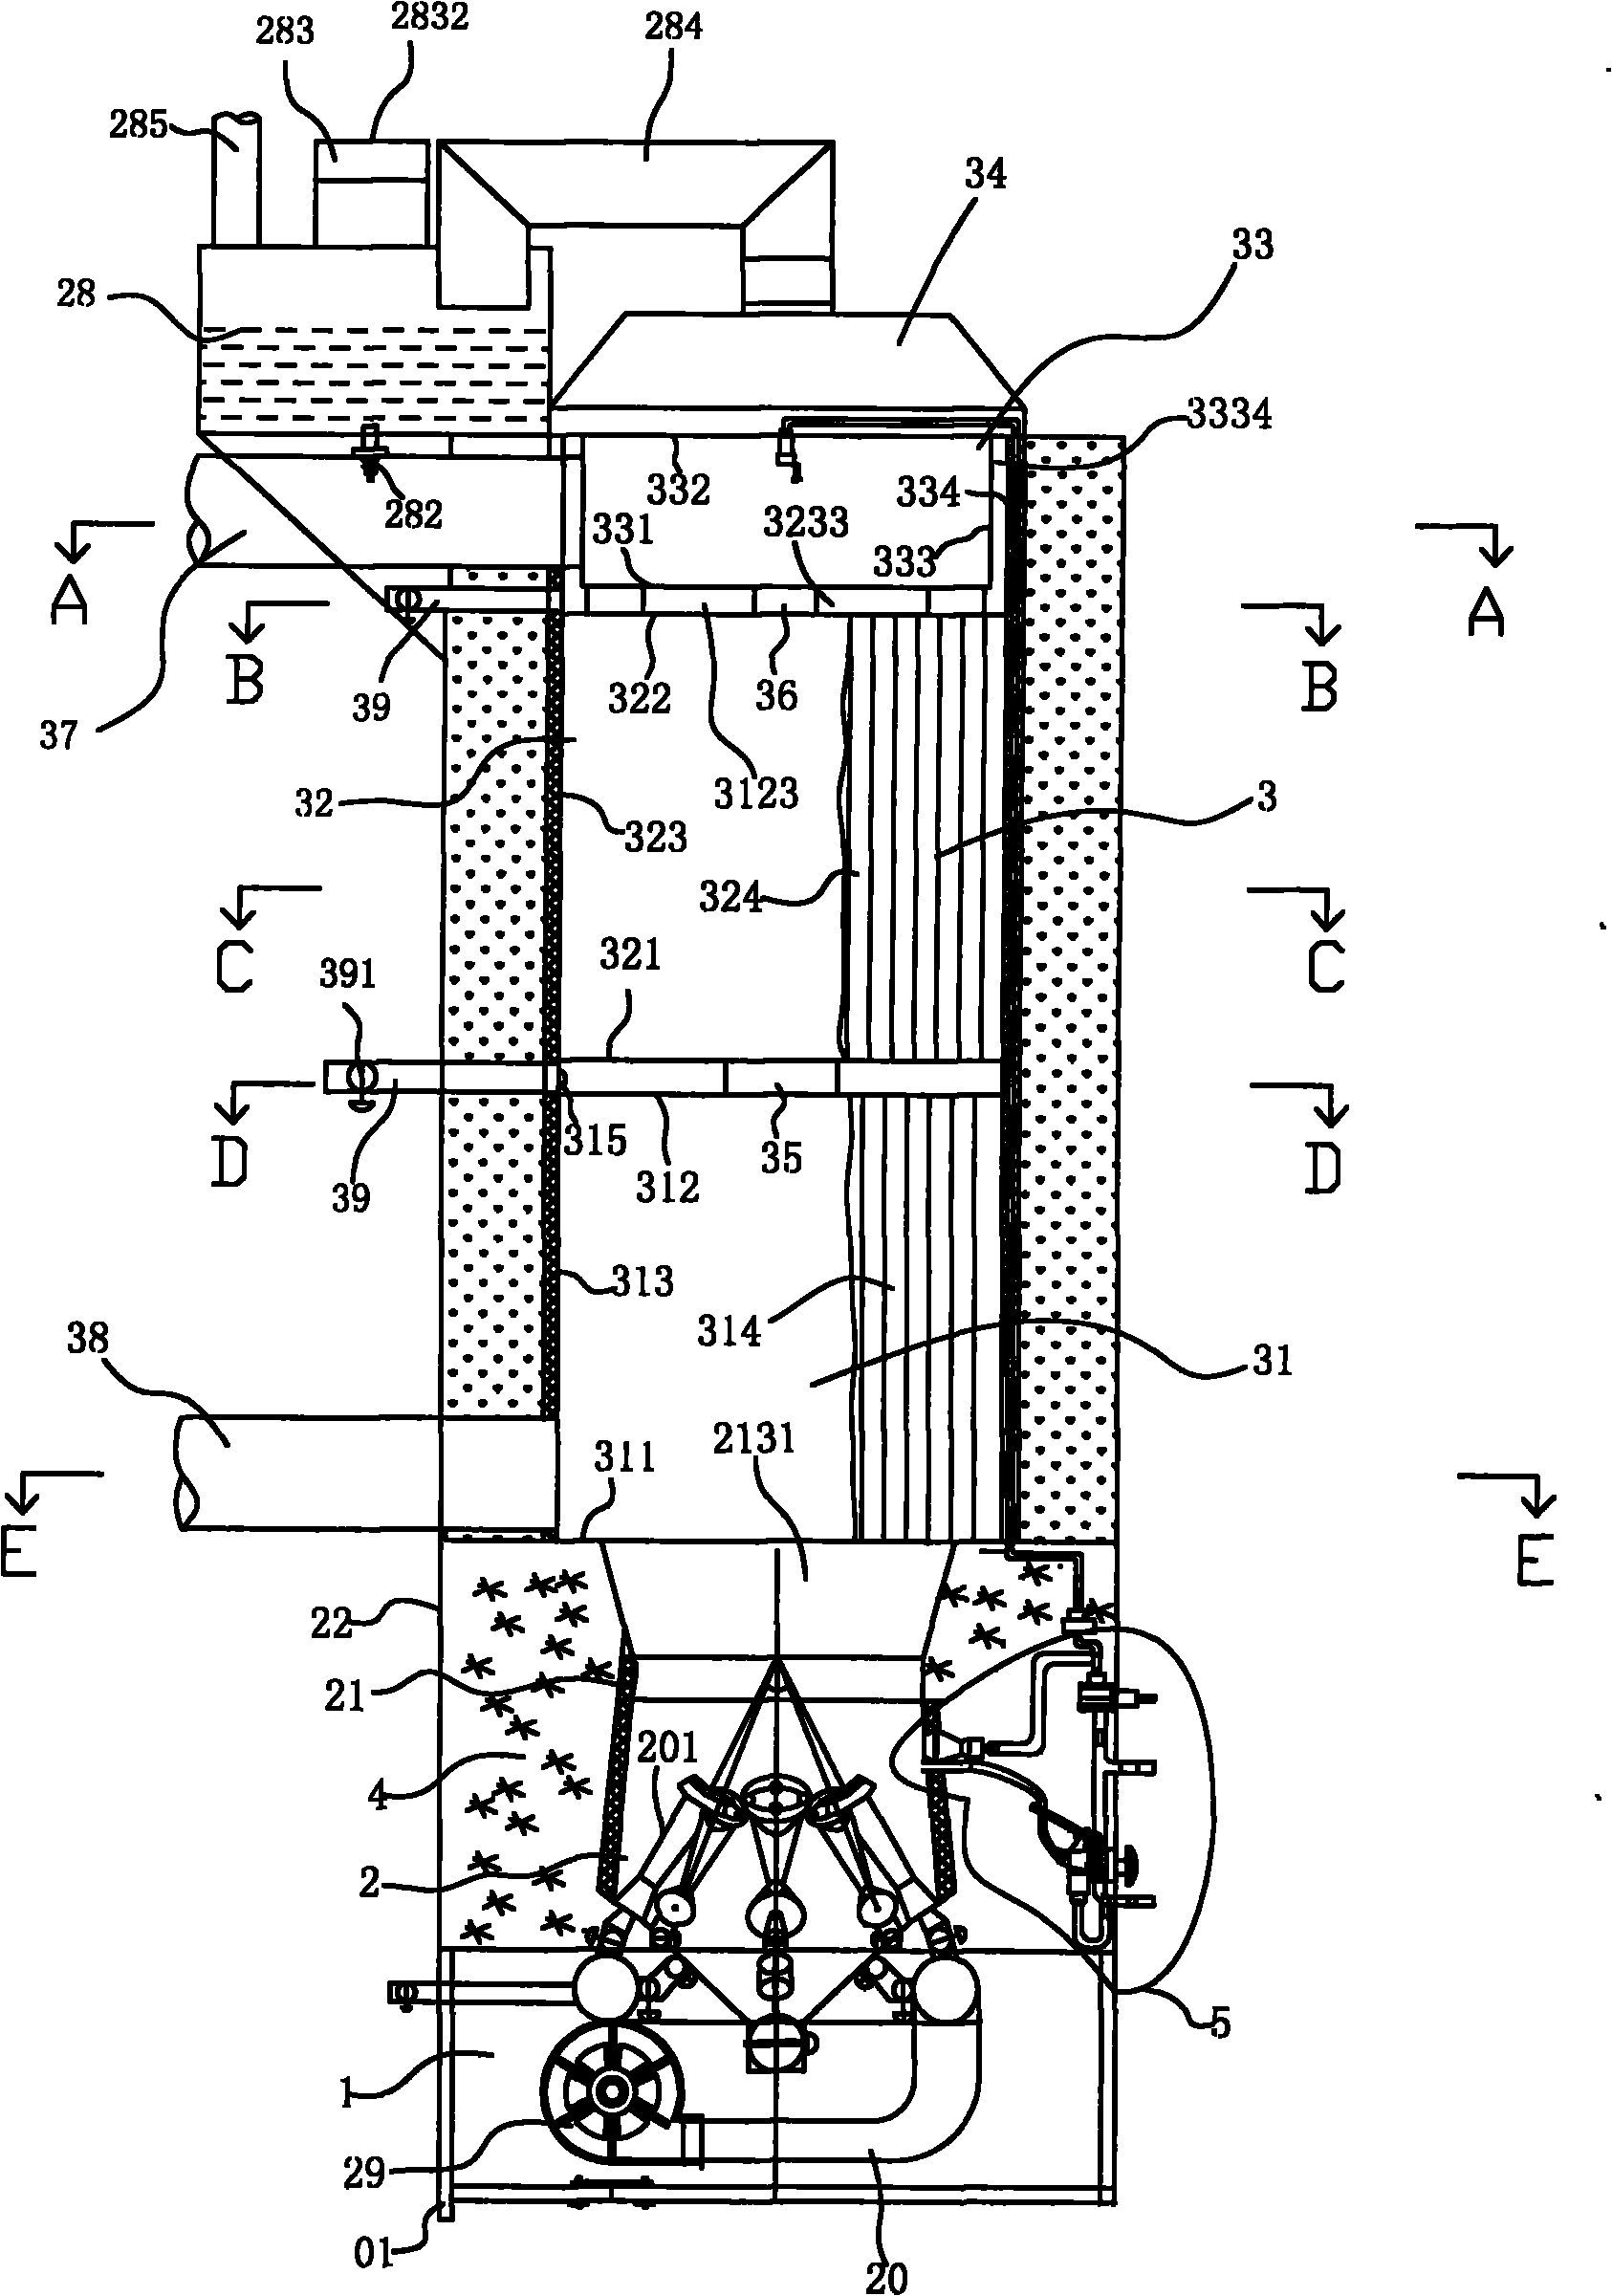 Straw fuel warm air air-conditioning heating device